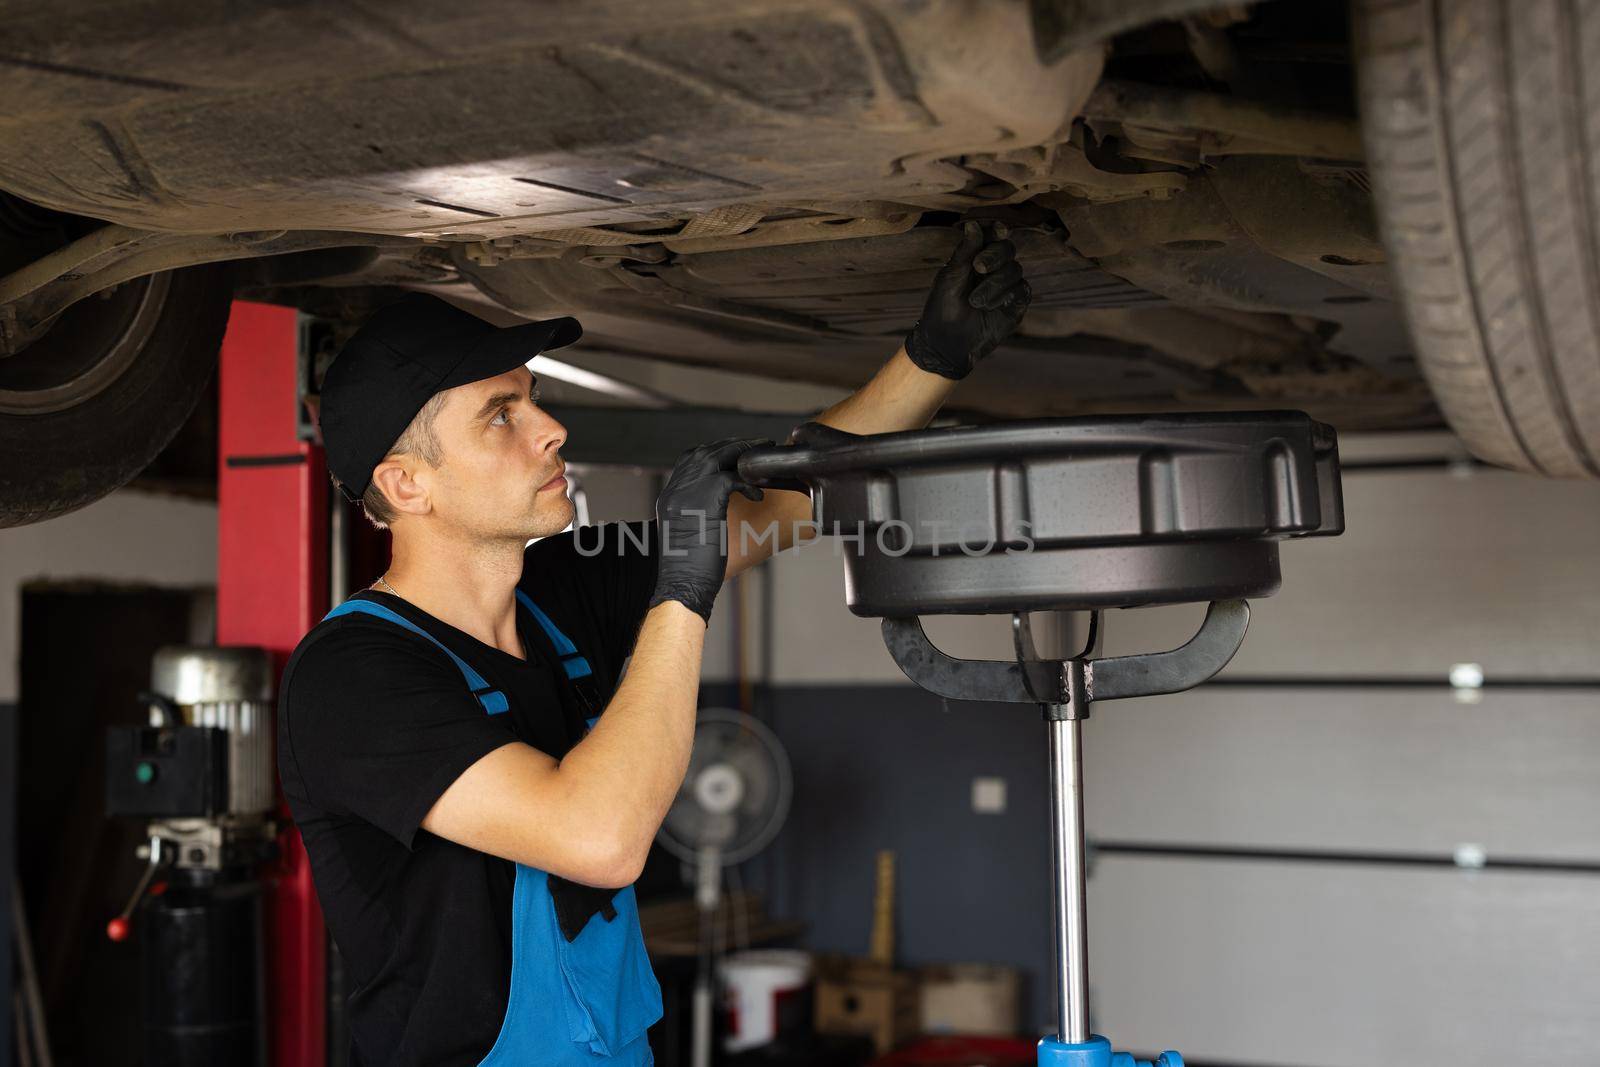 Changing the oil in a car engine. Car engine oil replacement. Car maintenance, car mechanic replaces the oil in the engine. Mechanic drain the old oil from the engine through the drain plug by uflypro